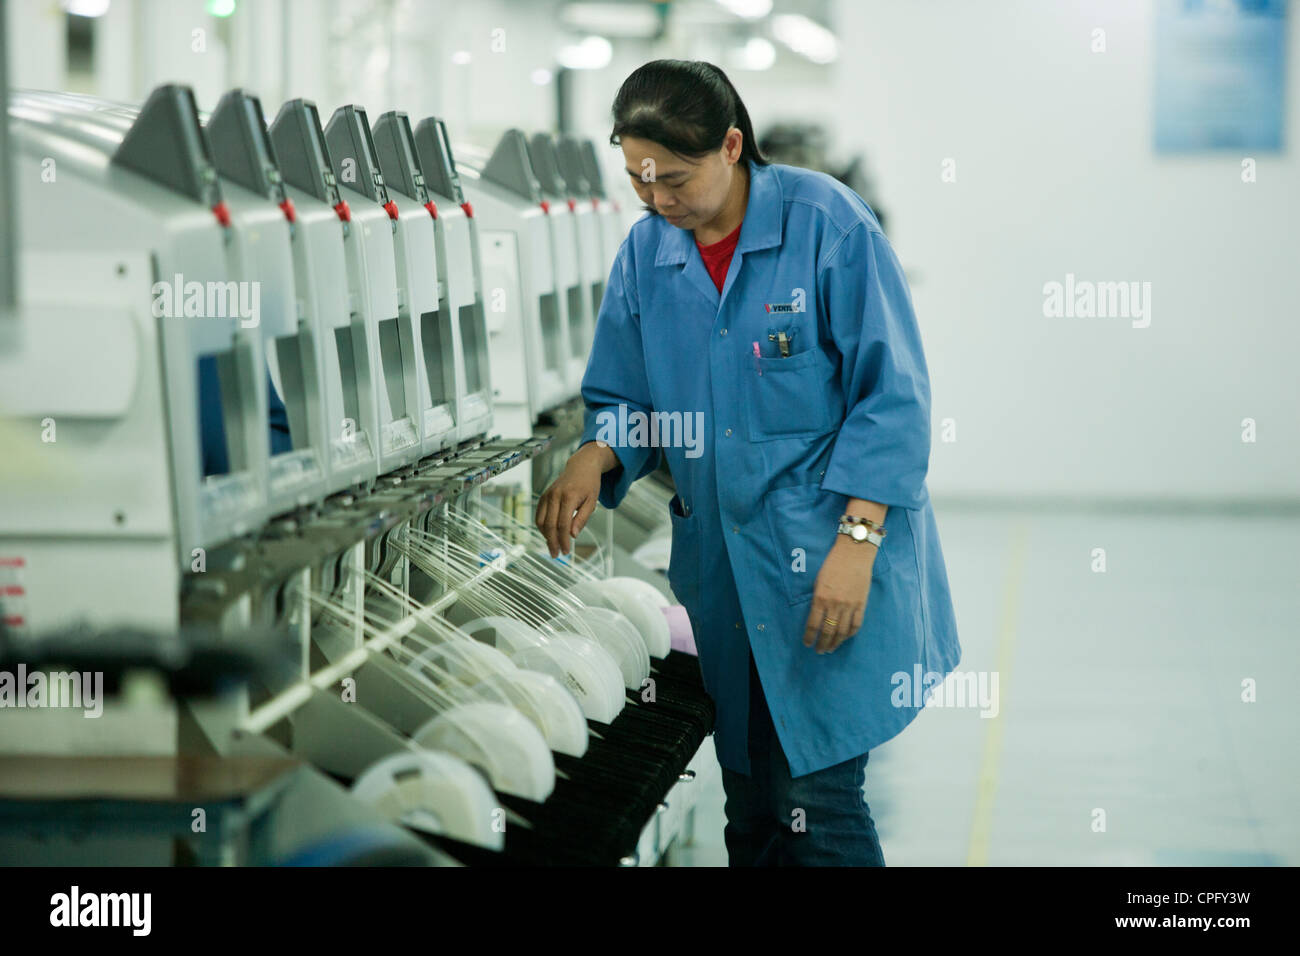 A worker on the assembly line at the Venture Corp. factory in Singapore Stock Photo